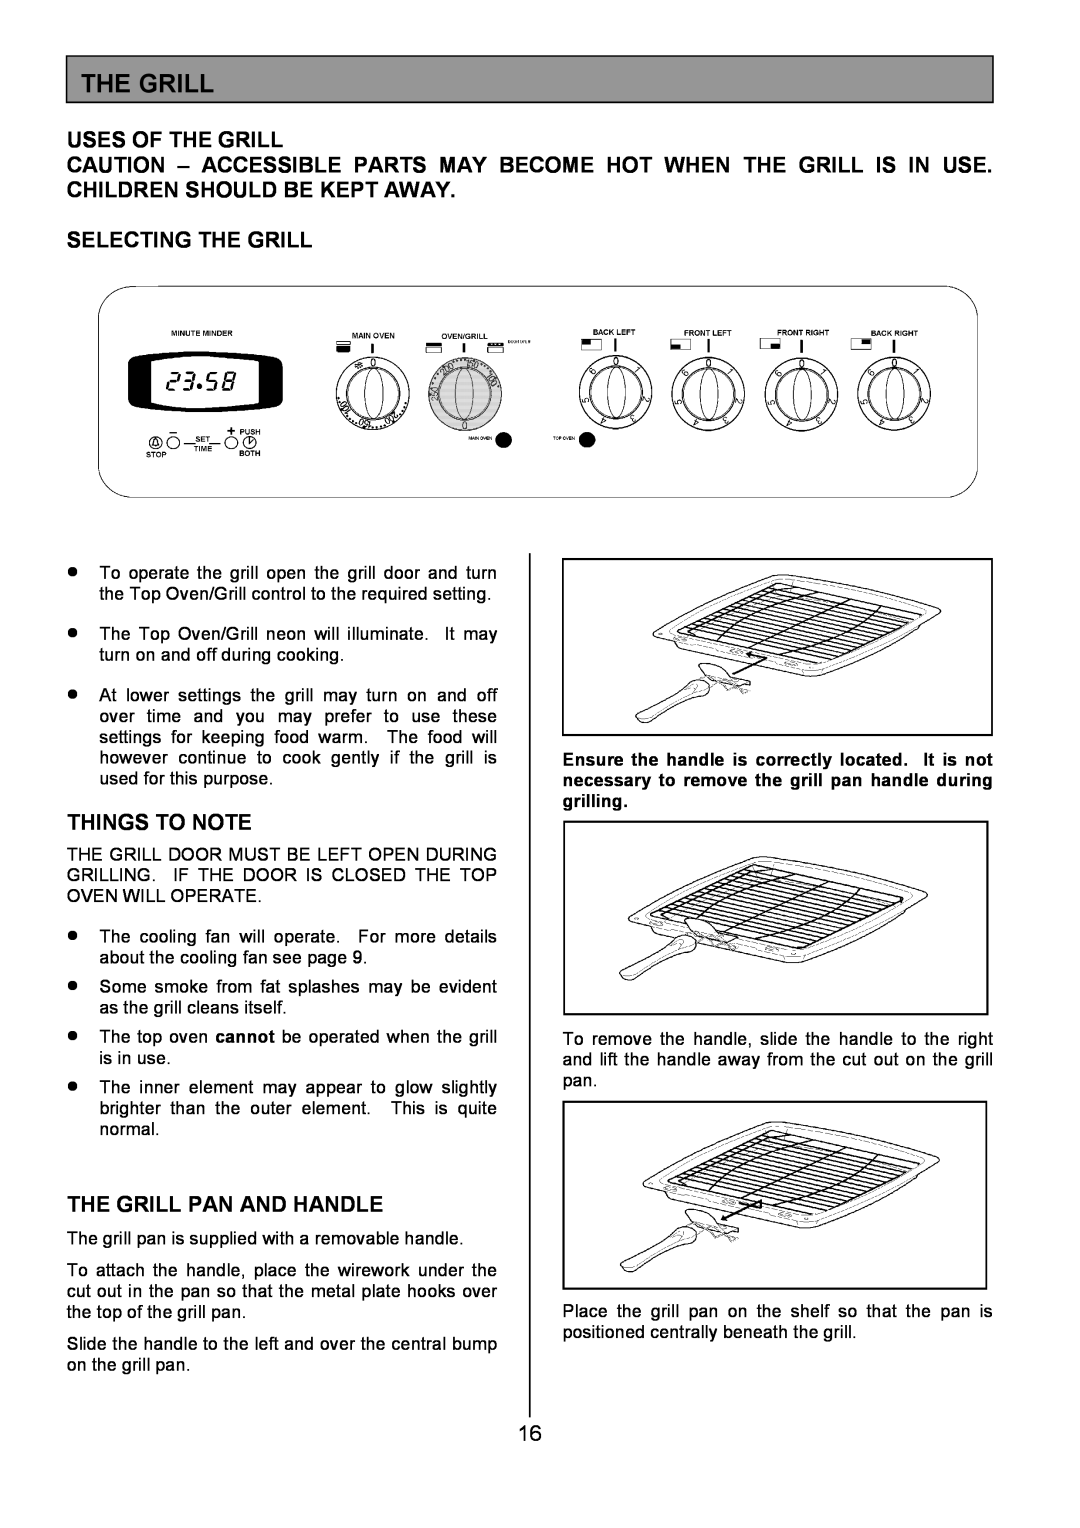 Tricity Bendix CSIE501 Uses Of The Grill, Selecting The Grill, Things To Note, The Grill Pan And Handle 